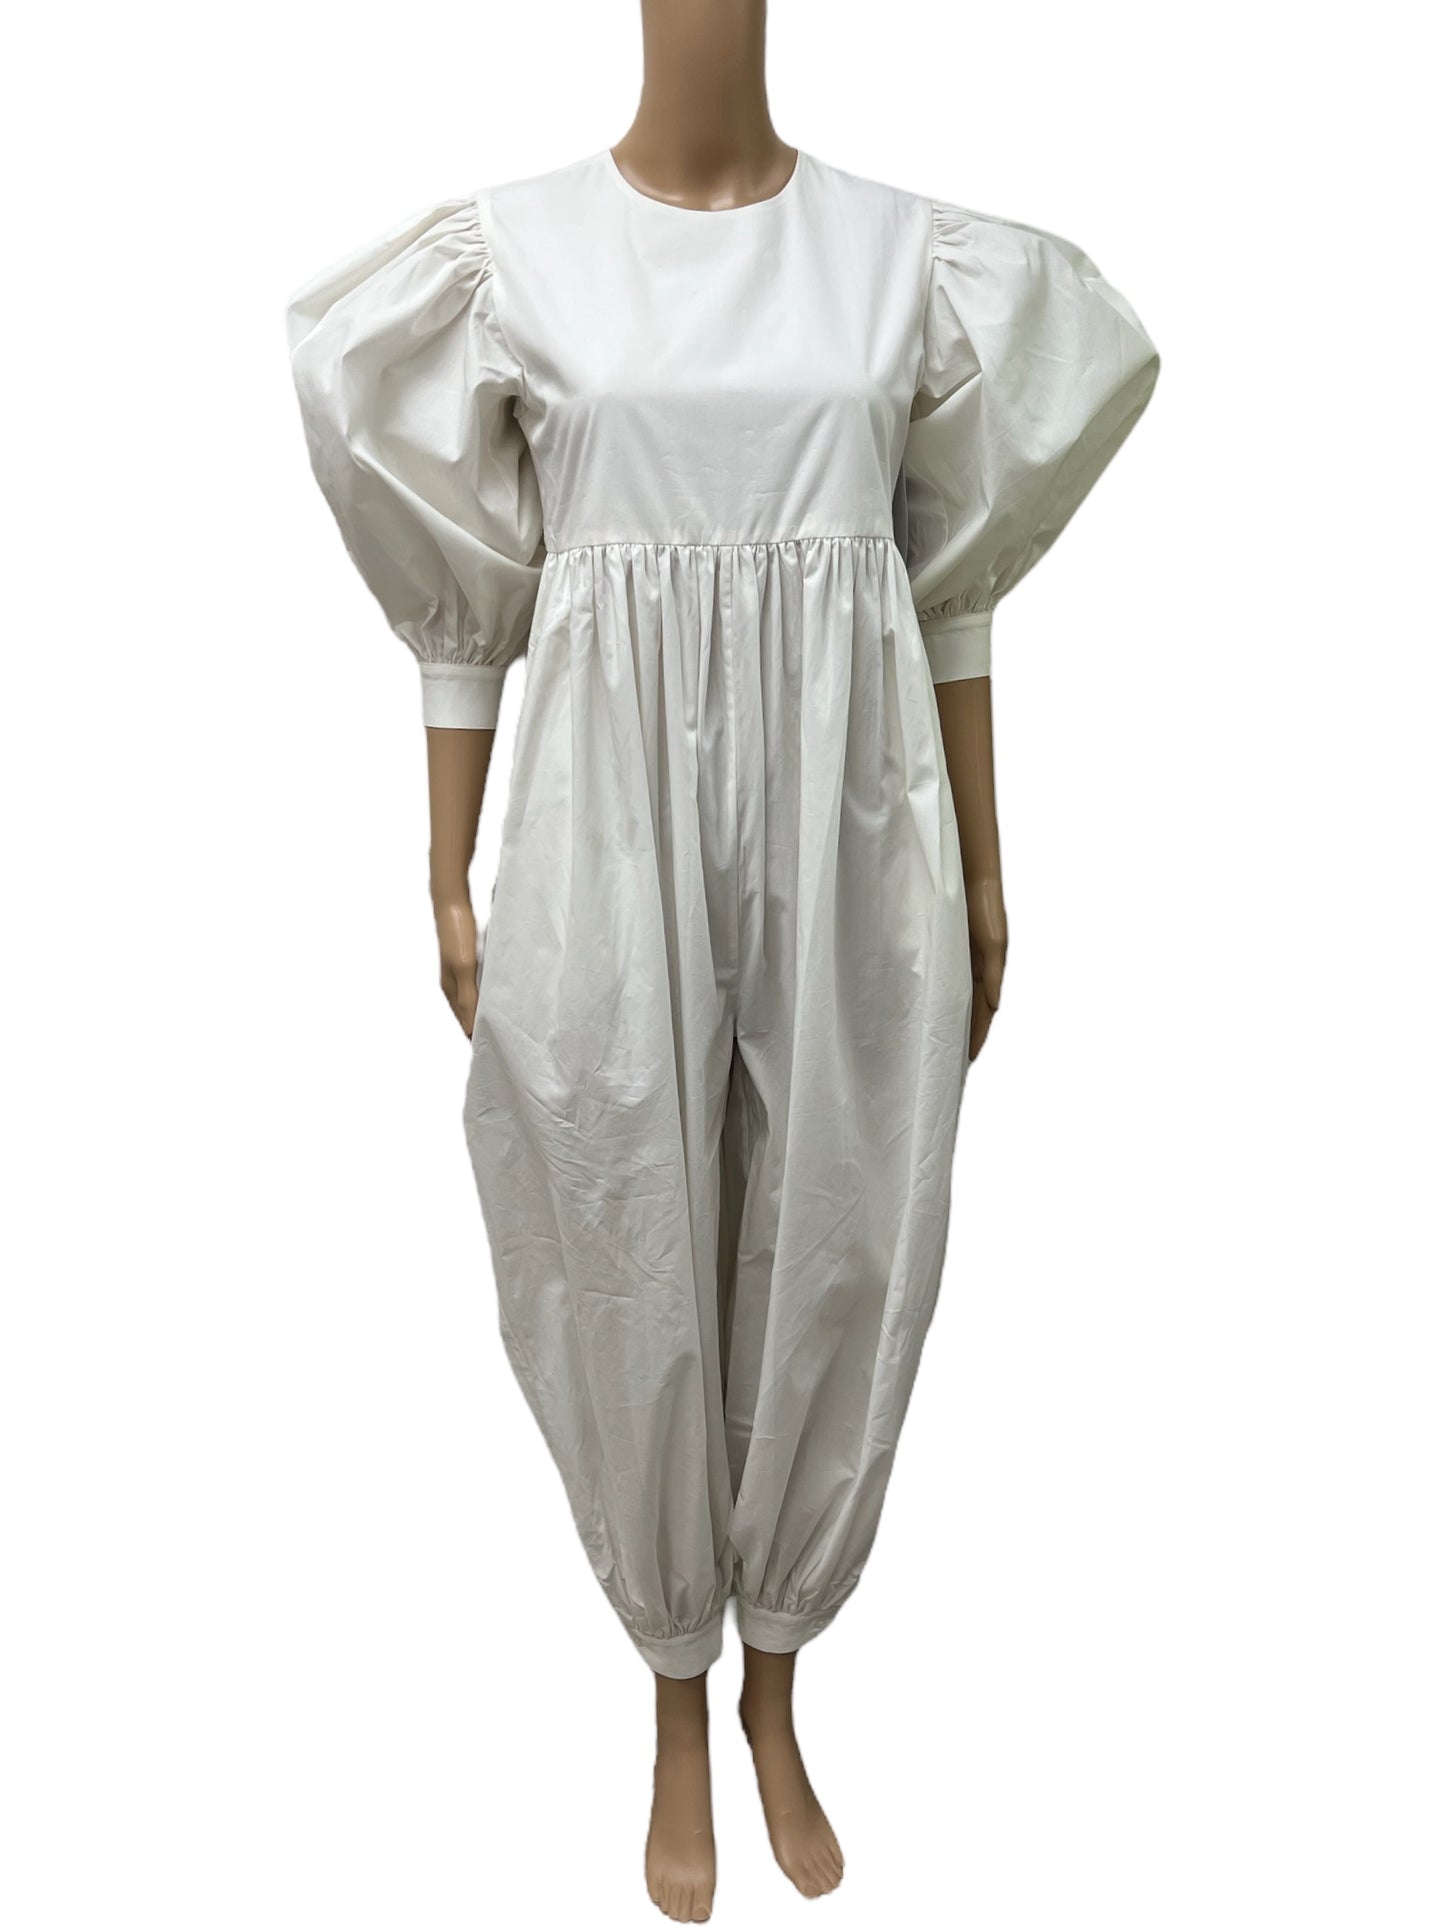 The Amelia Jumpsuit Sample in off-white